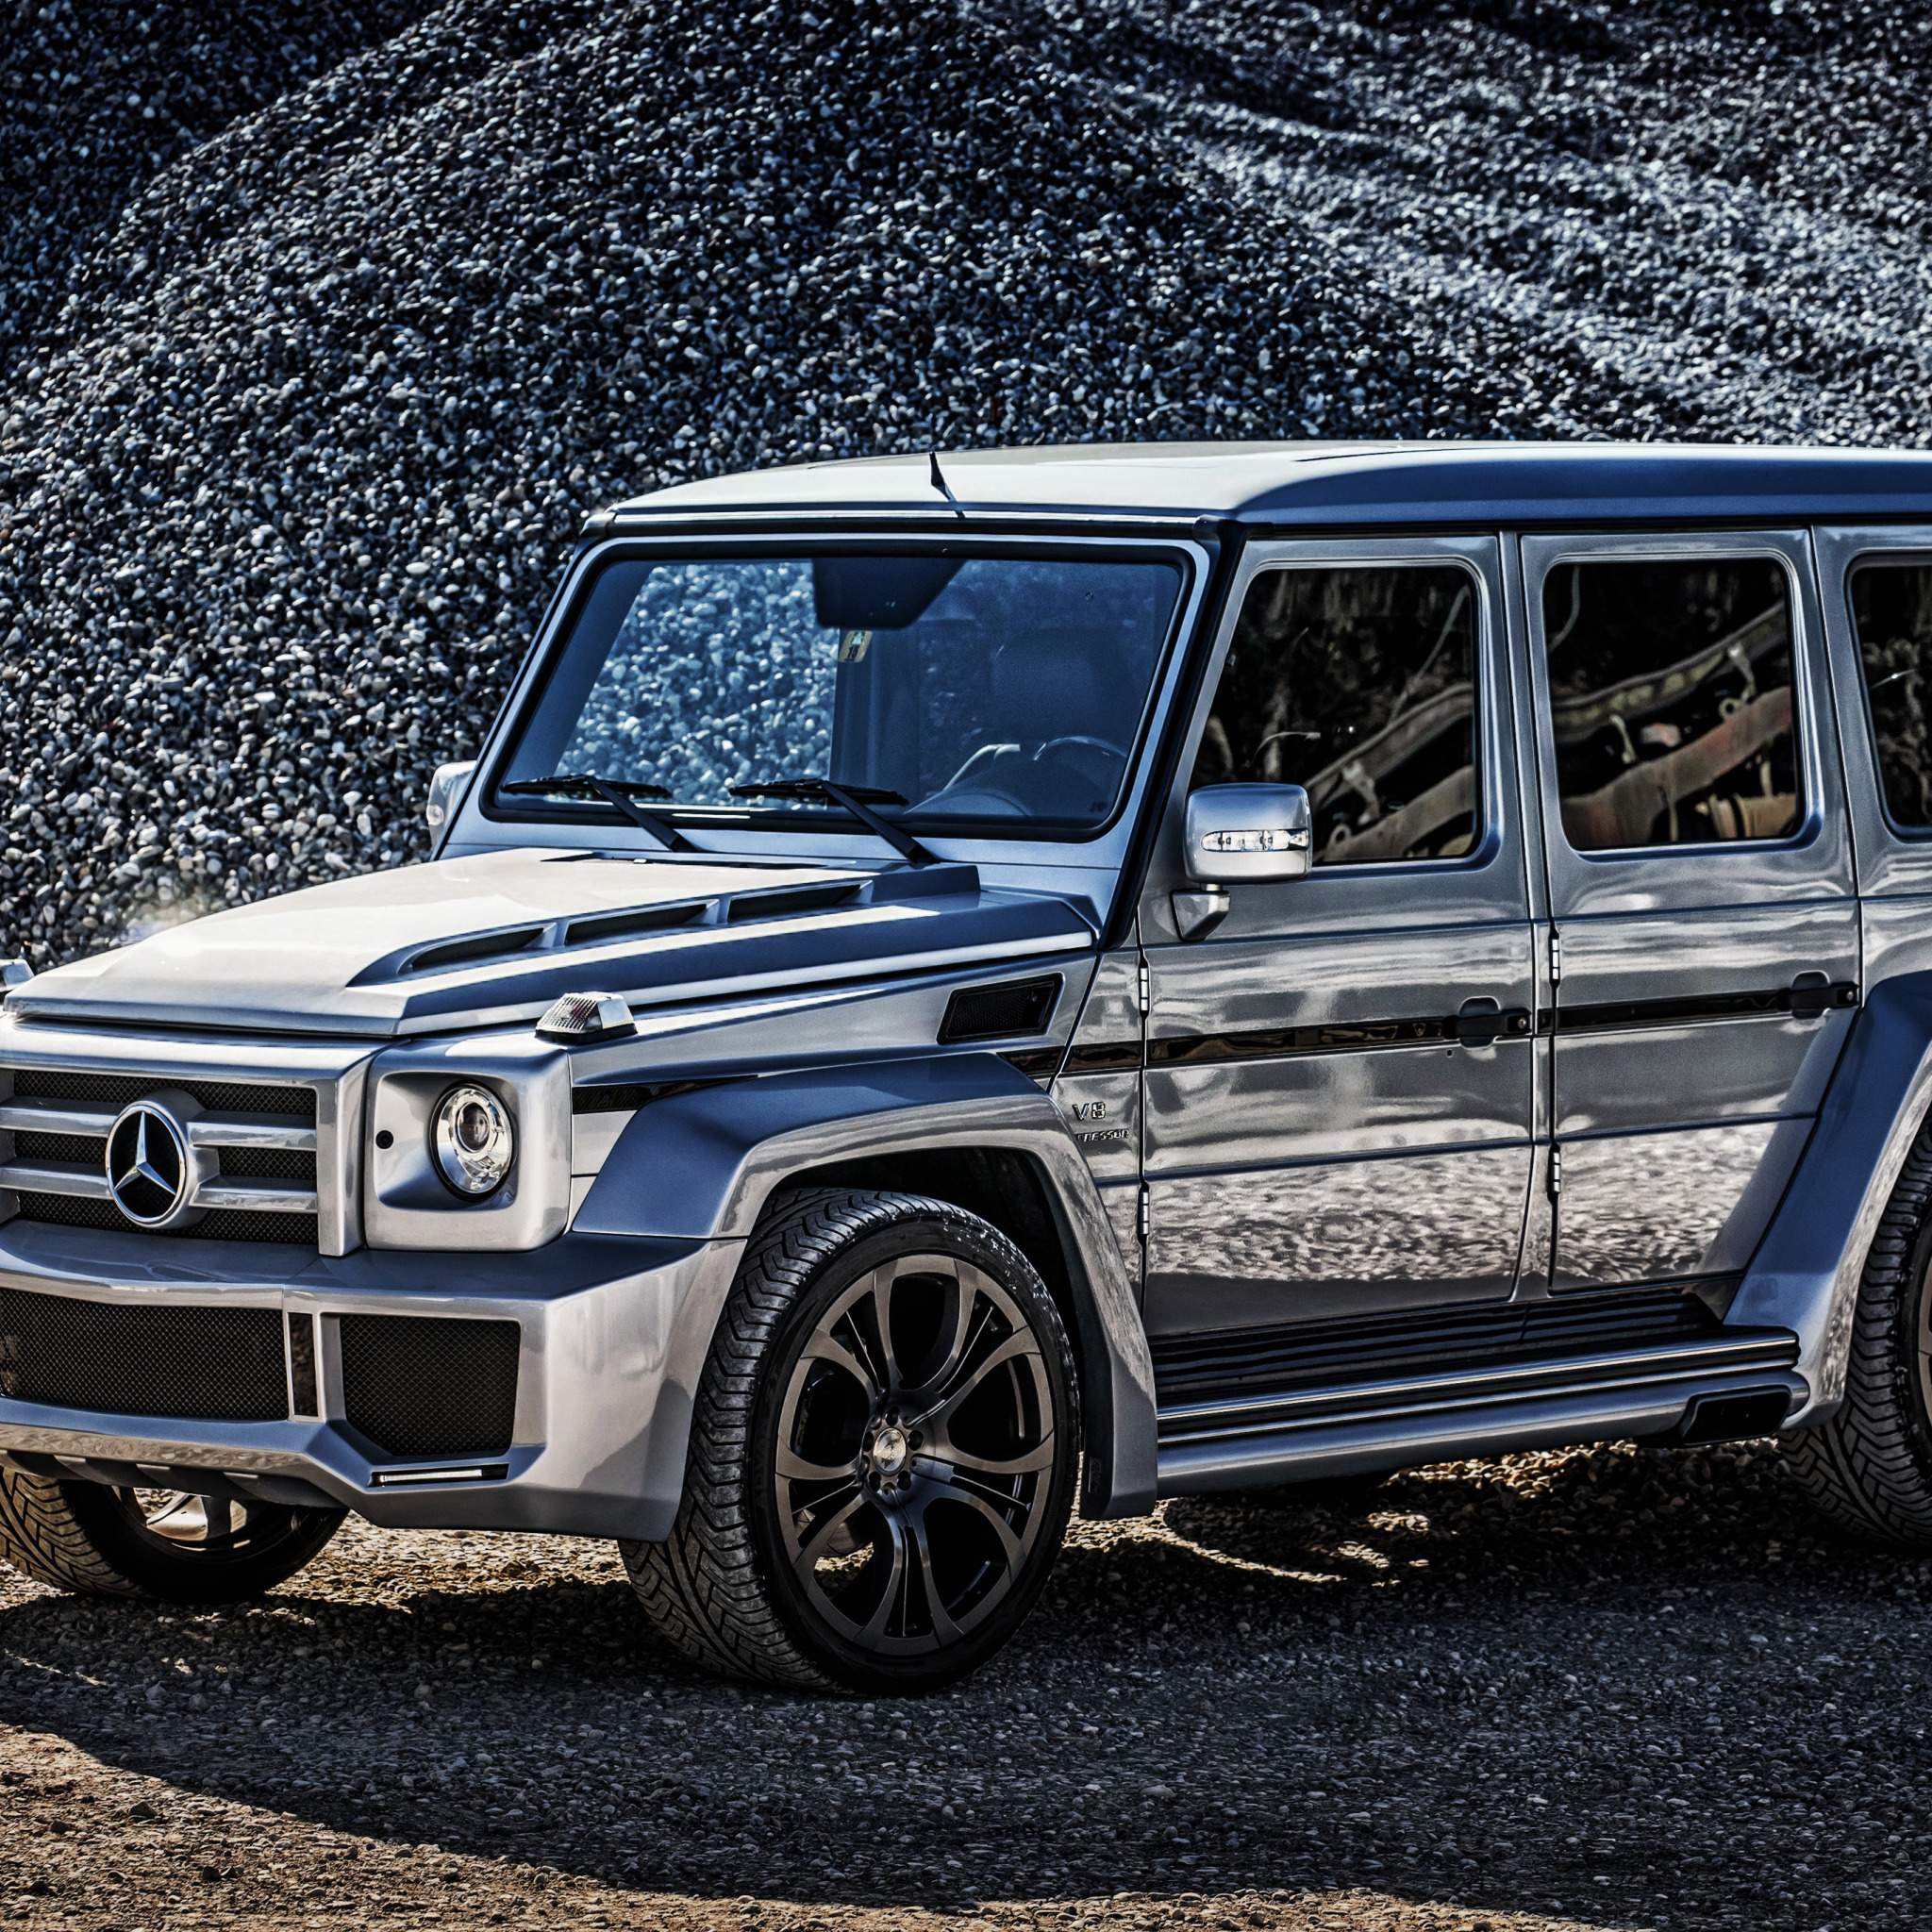 4 4 g class. Мерседес Бенц Гелендваген. Mercedes g63 AMG. Мерседес Гелендваген Брабус. Mercedes Benz g class w463.